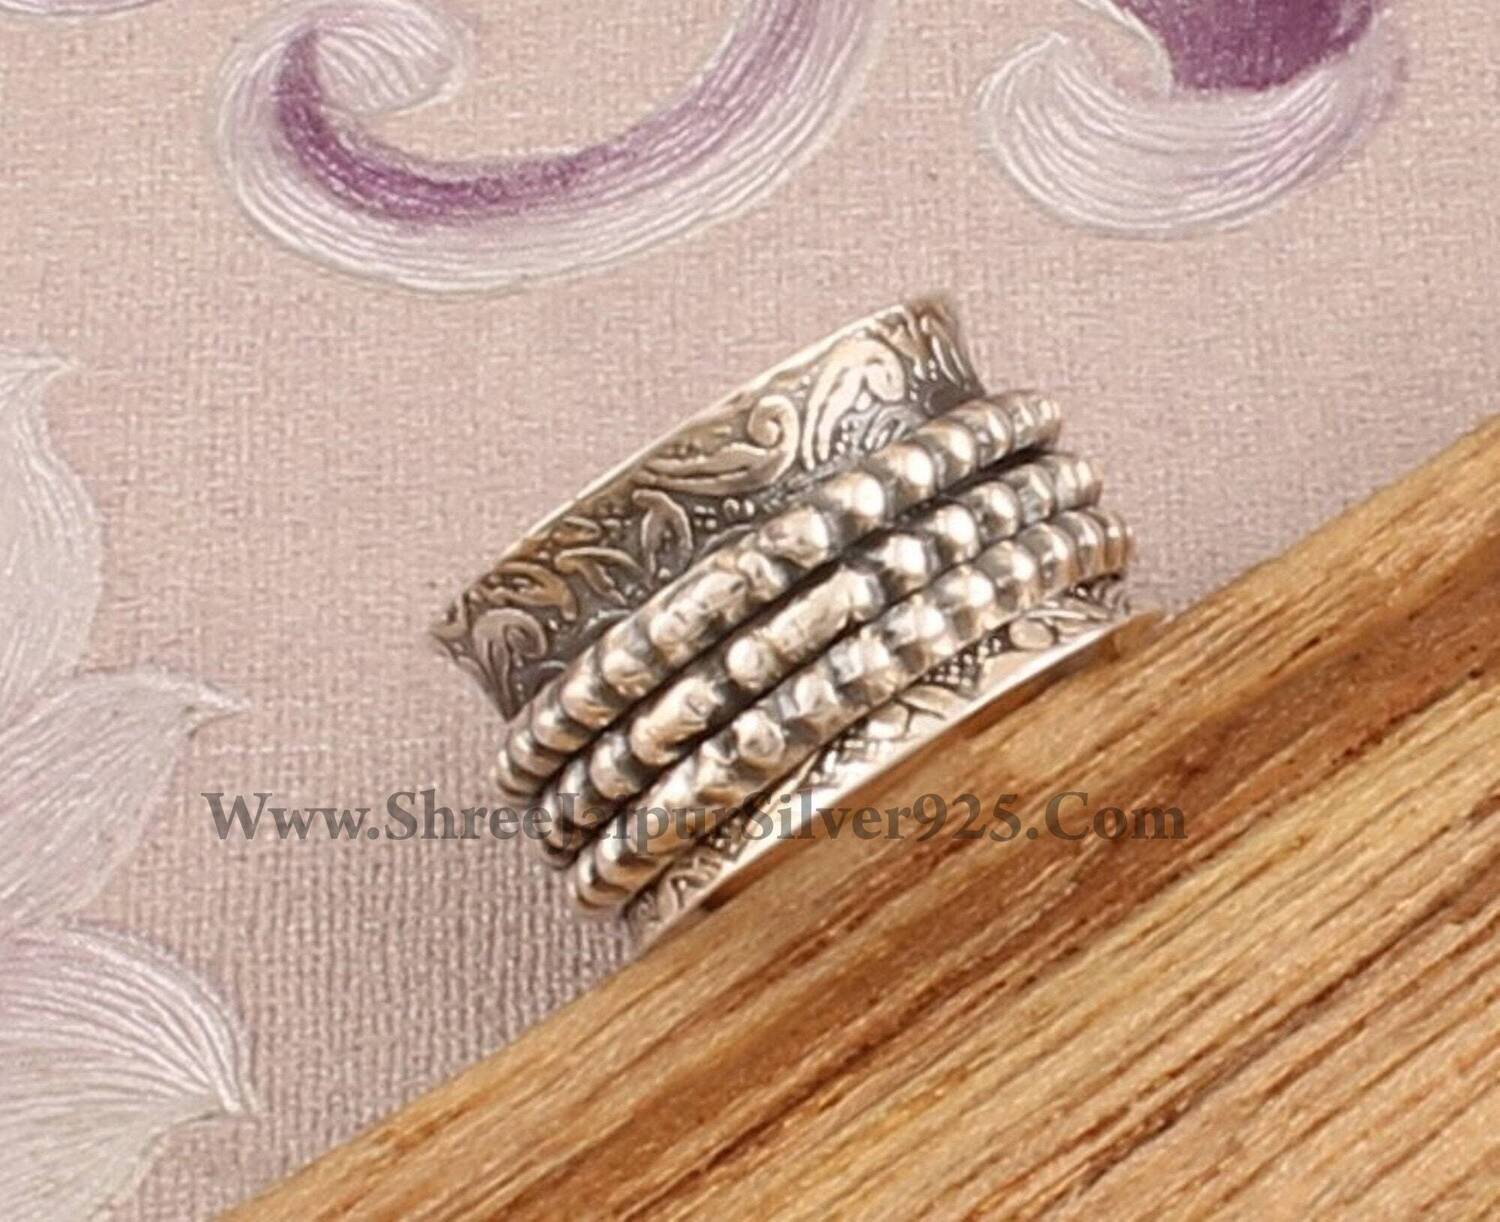 925 Sterling Silver Designer Carved Band Spinner Ring, Handmade Antiqued Silver Meditation Ring, Boho Worry Ring, Anxiety Ring, Gift For Her